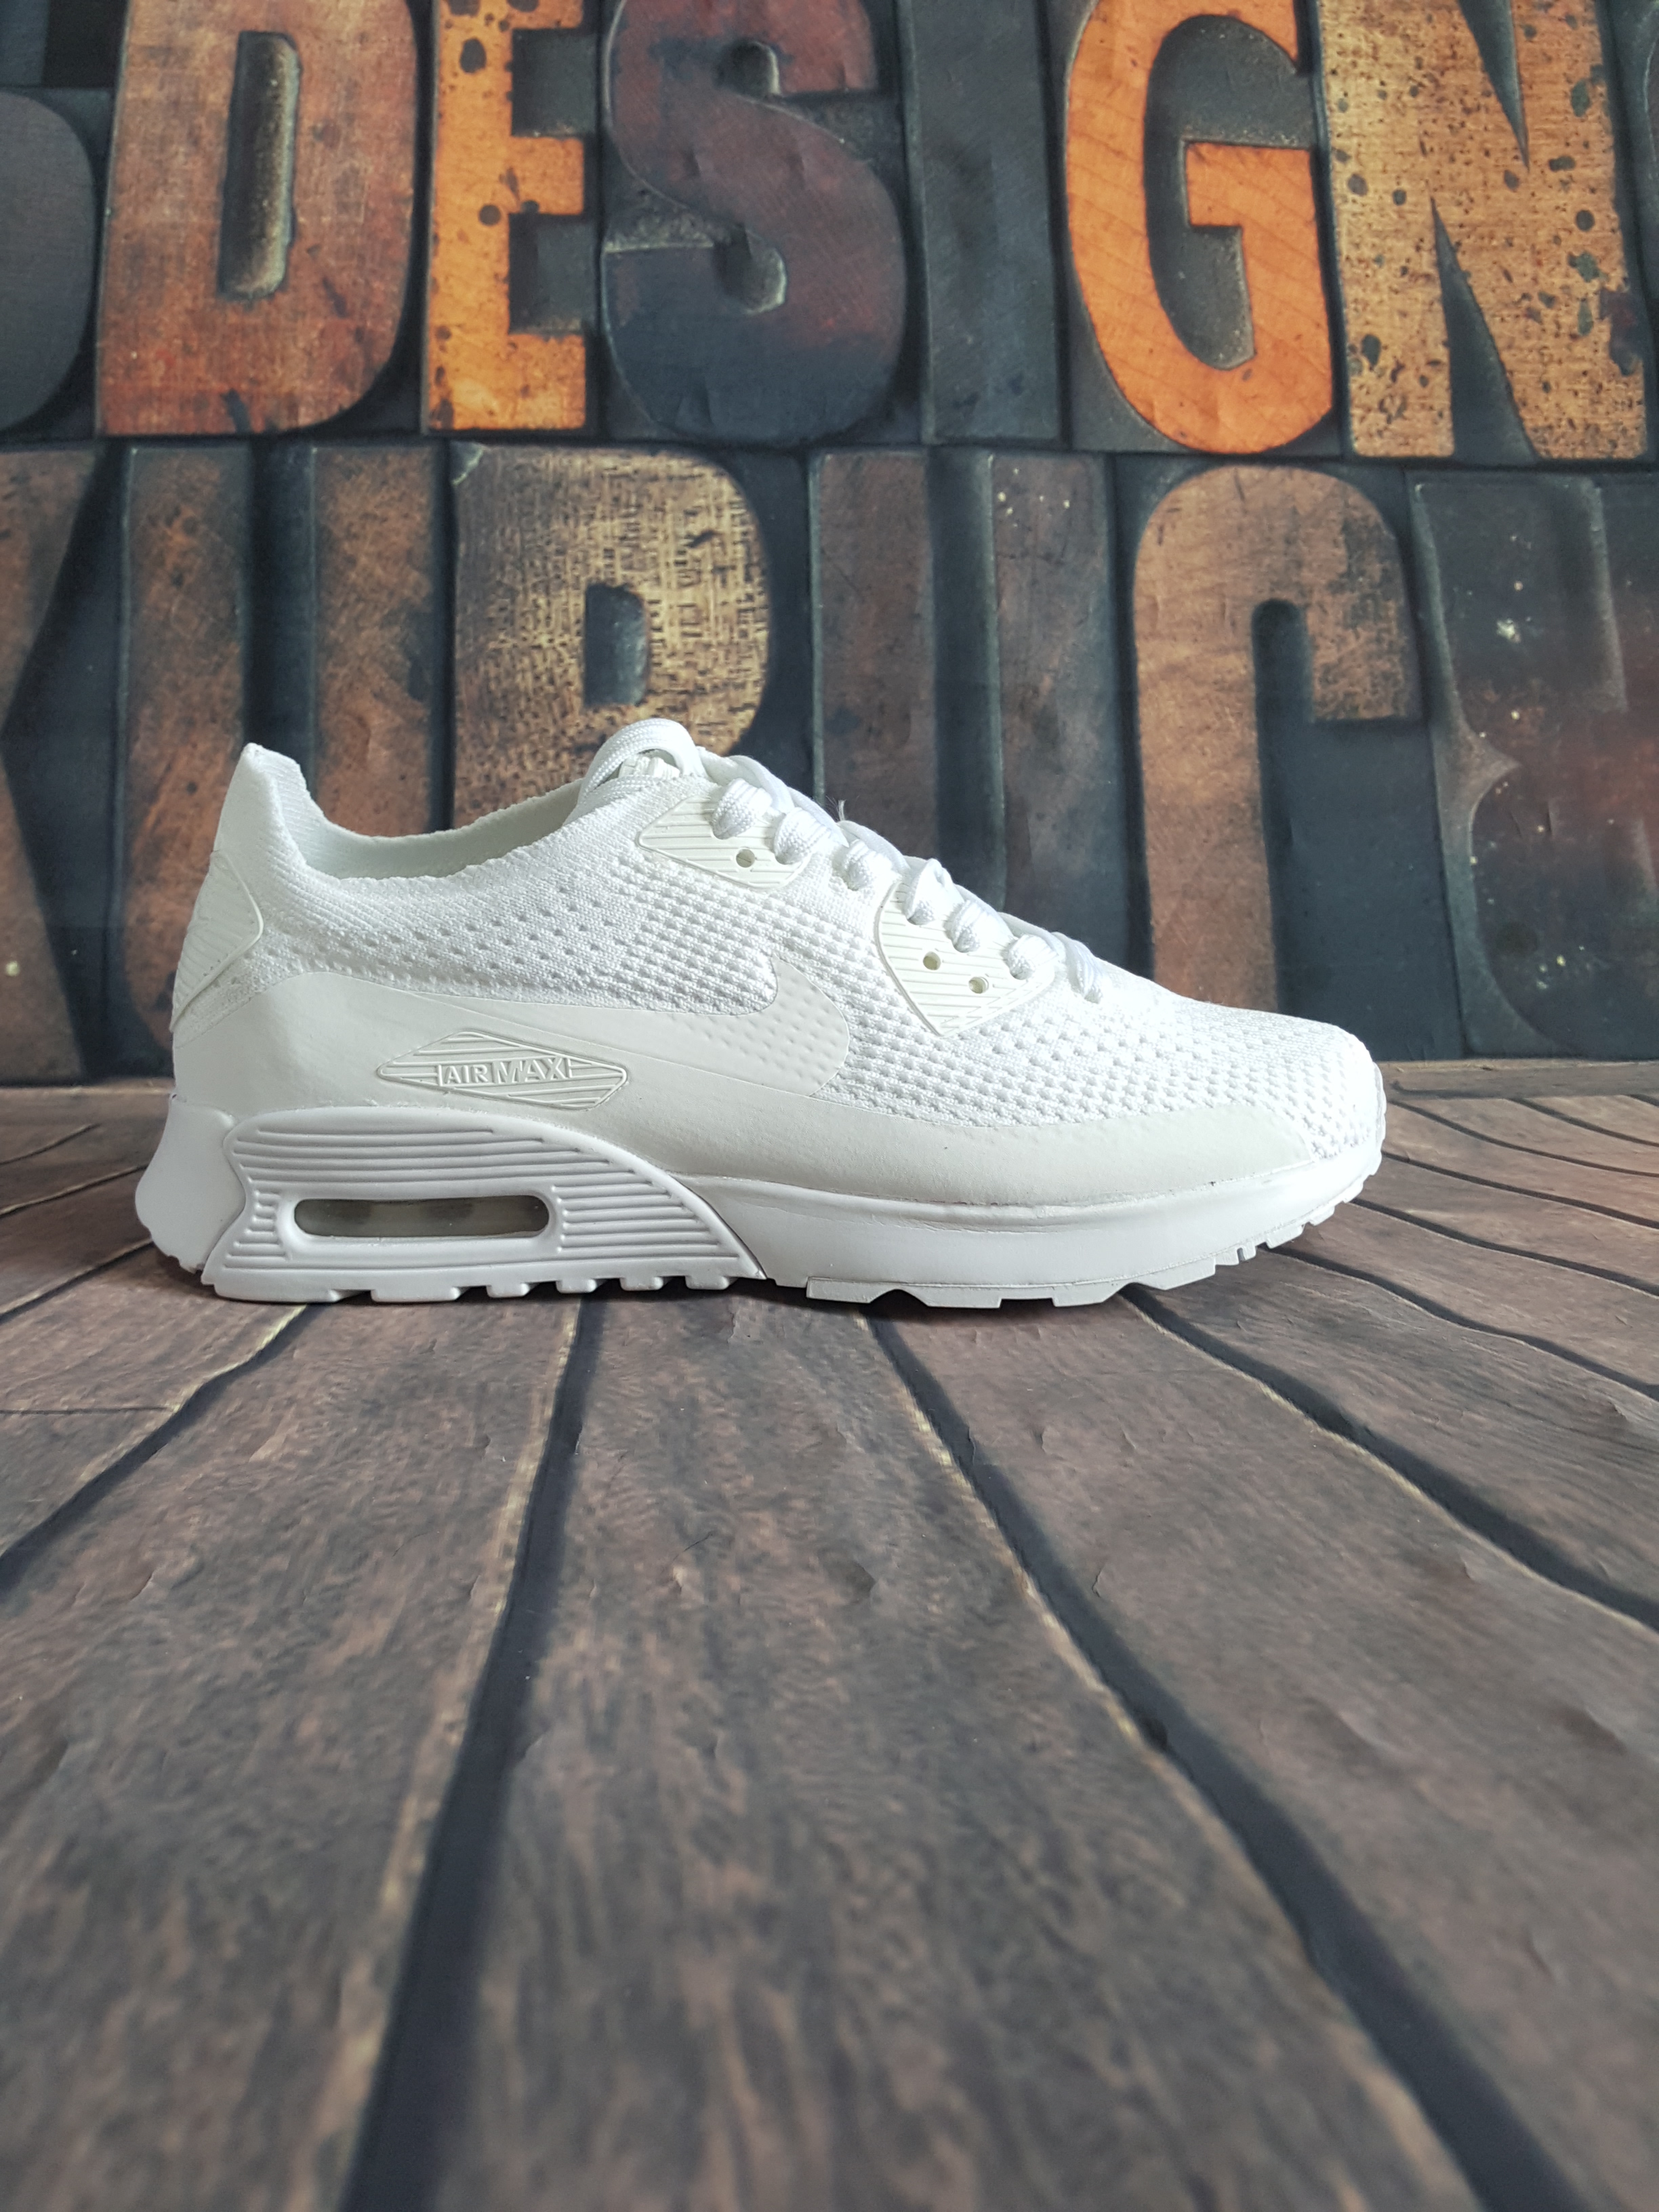 2020 Nike Air Max 90 Flyknit All White